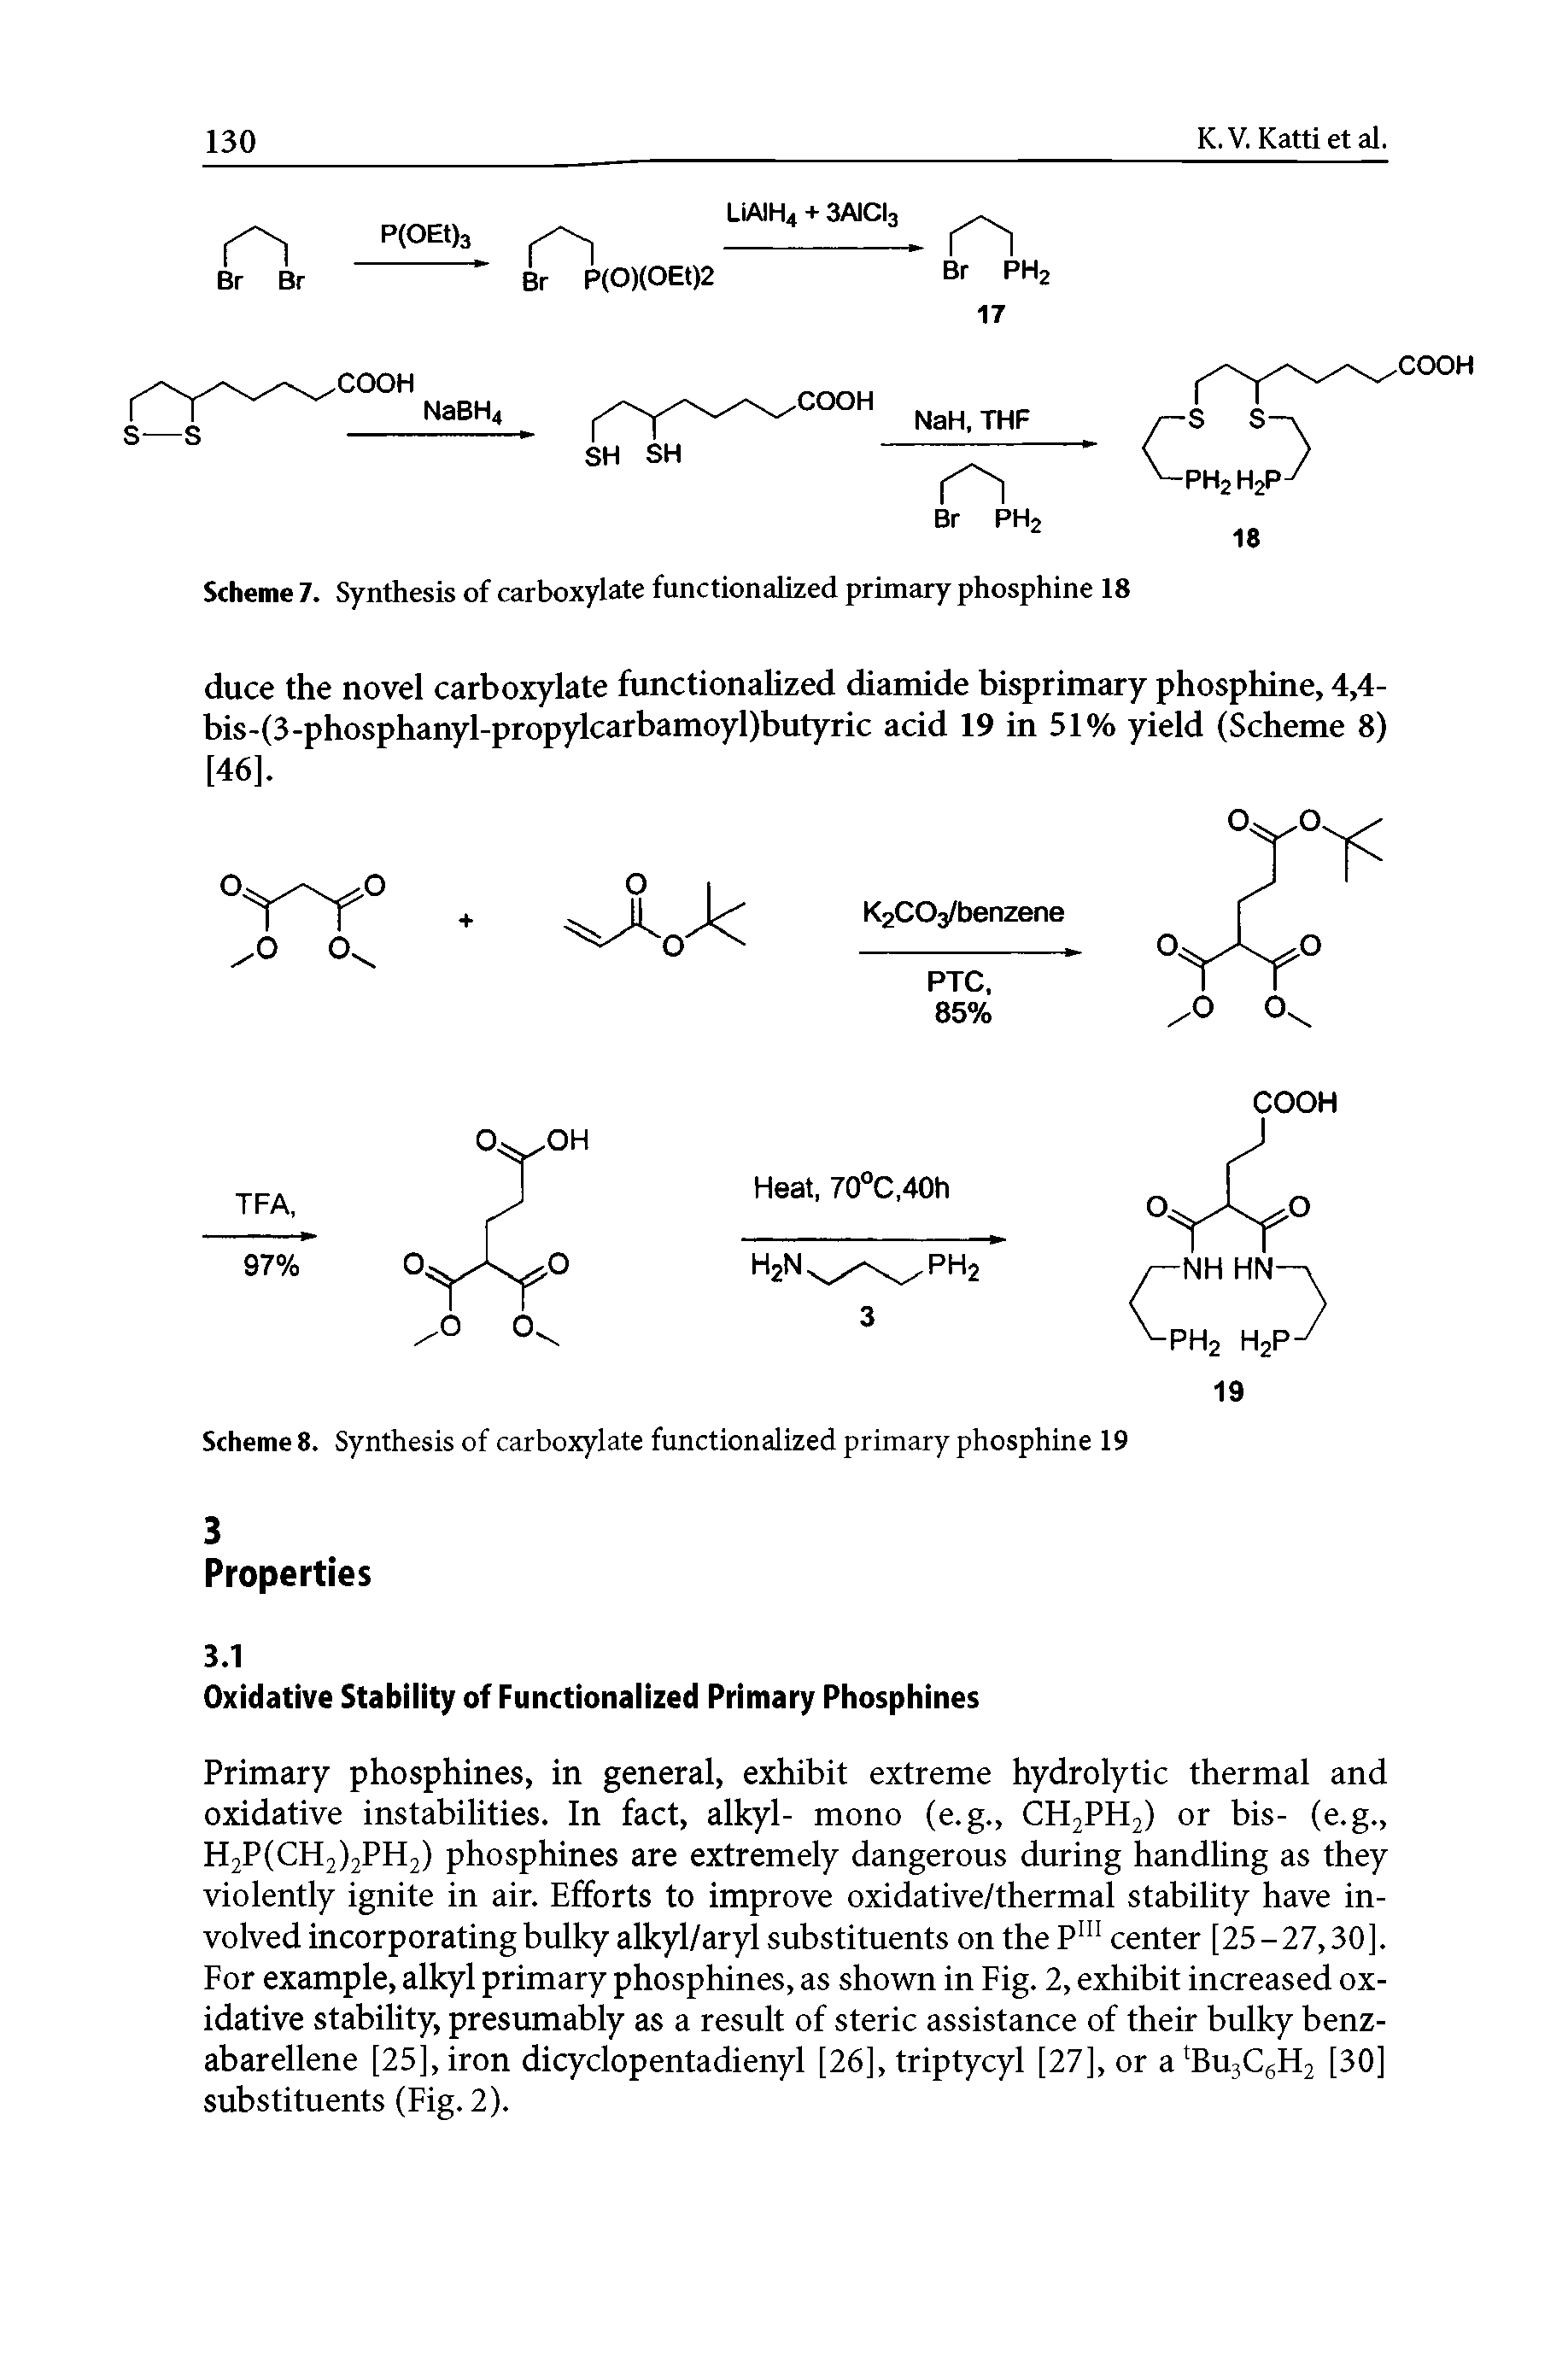 Scheme 7. Synthesis of carboxylate functionalized primary phosphine 18...